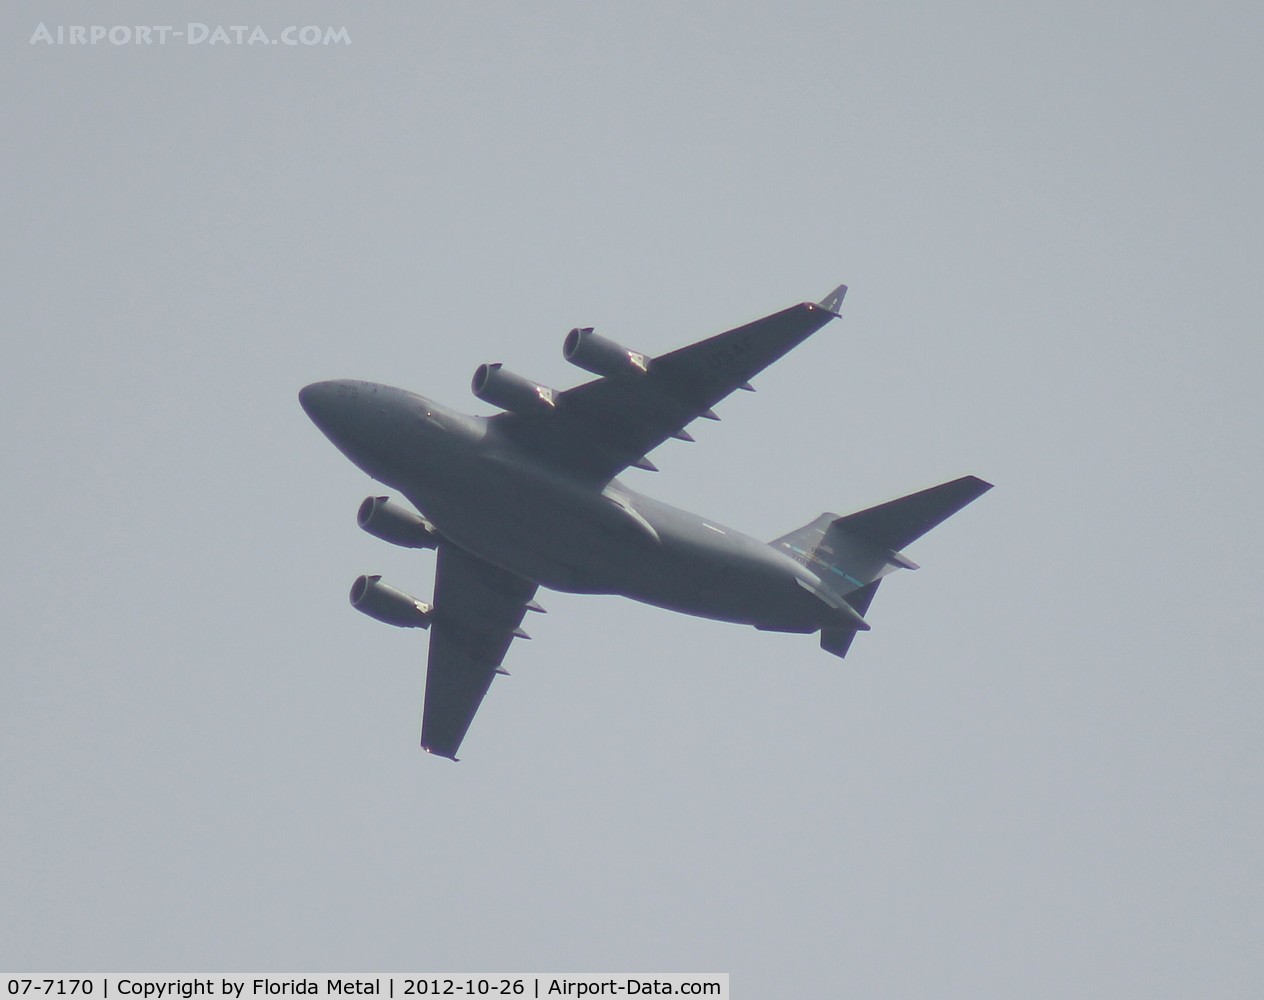 07-7170, Boeing C-17A Globemaster III C/N F-181, C-17 departing from MCO over Orlando Executive Airport